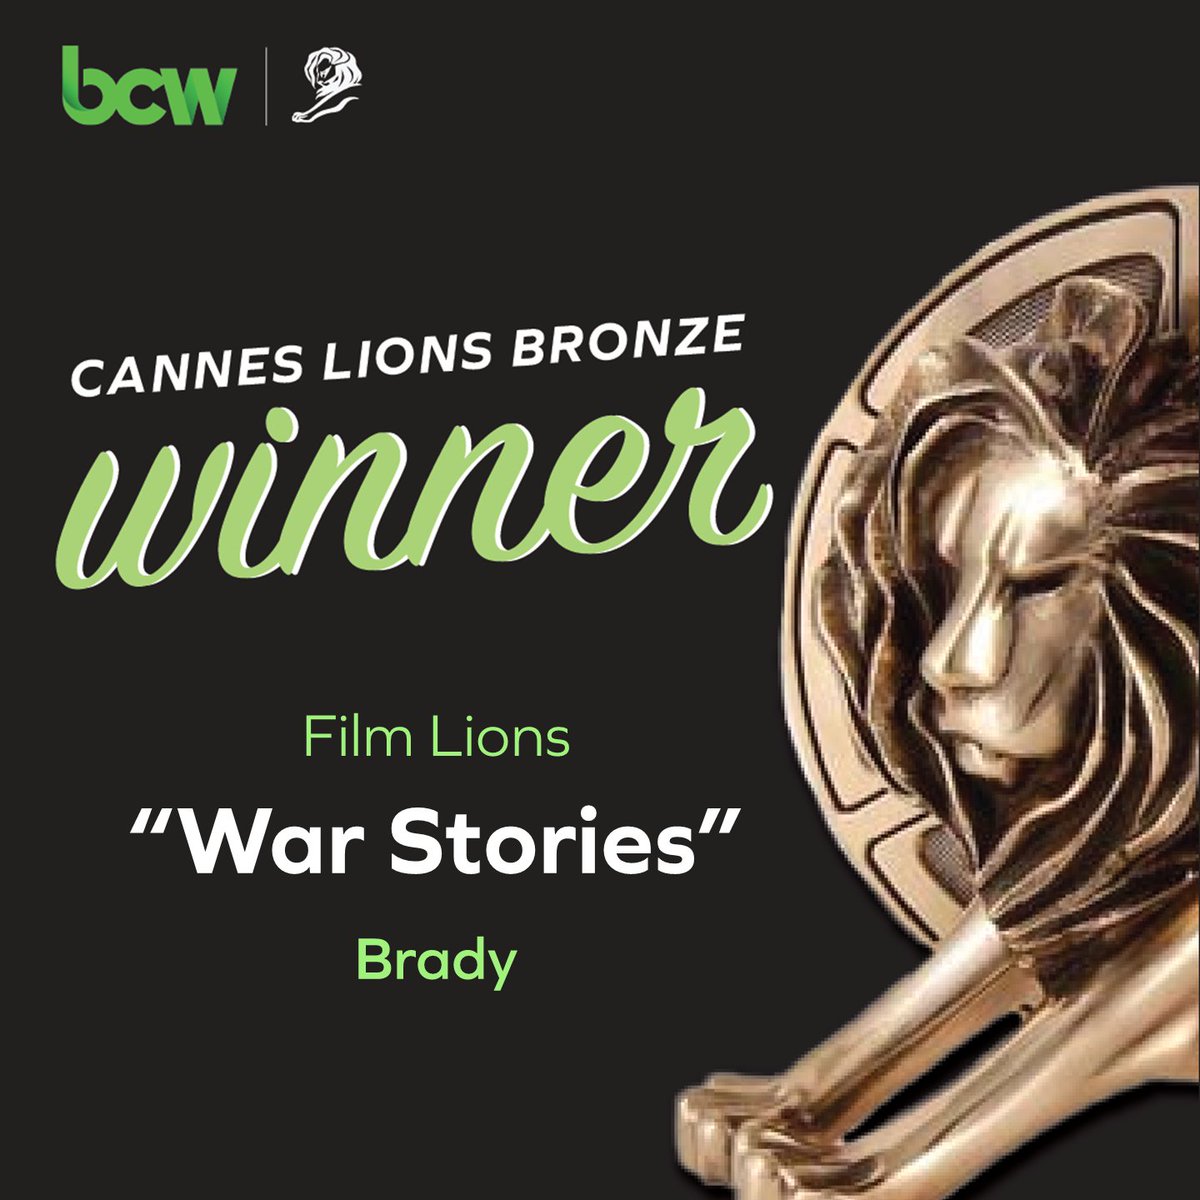 This just in: BCW has won a Bronze Lion in Film for our work with @bradybuzz on 'War Stories!'

Congratulations to our people, clients and agency on this fantastic recognition!

View the winners: bit.ly/3r3g5em

#CannesLions2023 #CannesLions70 #BCWatCannes2023 #WPPCannes